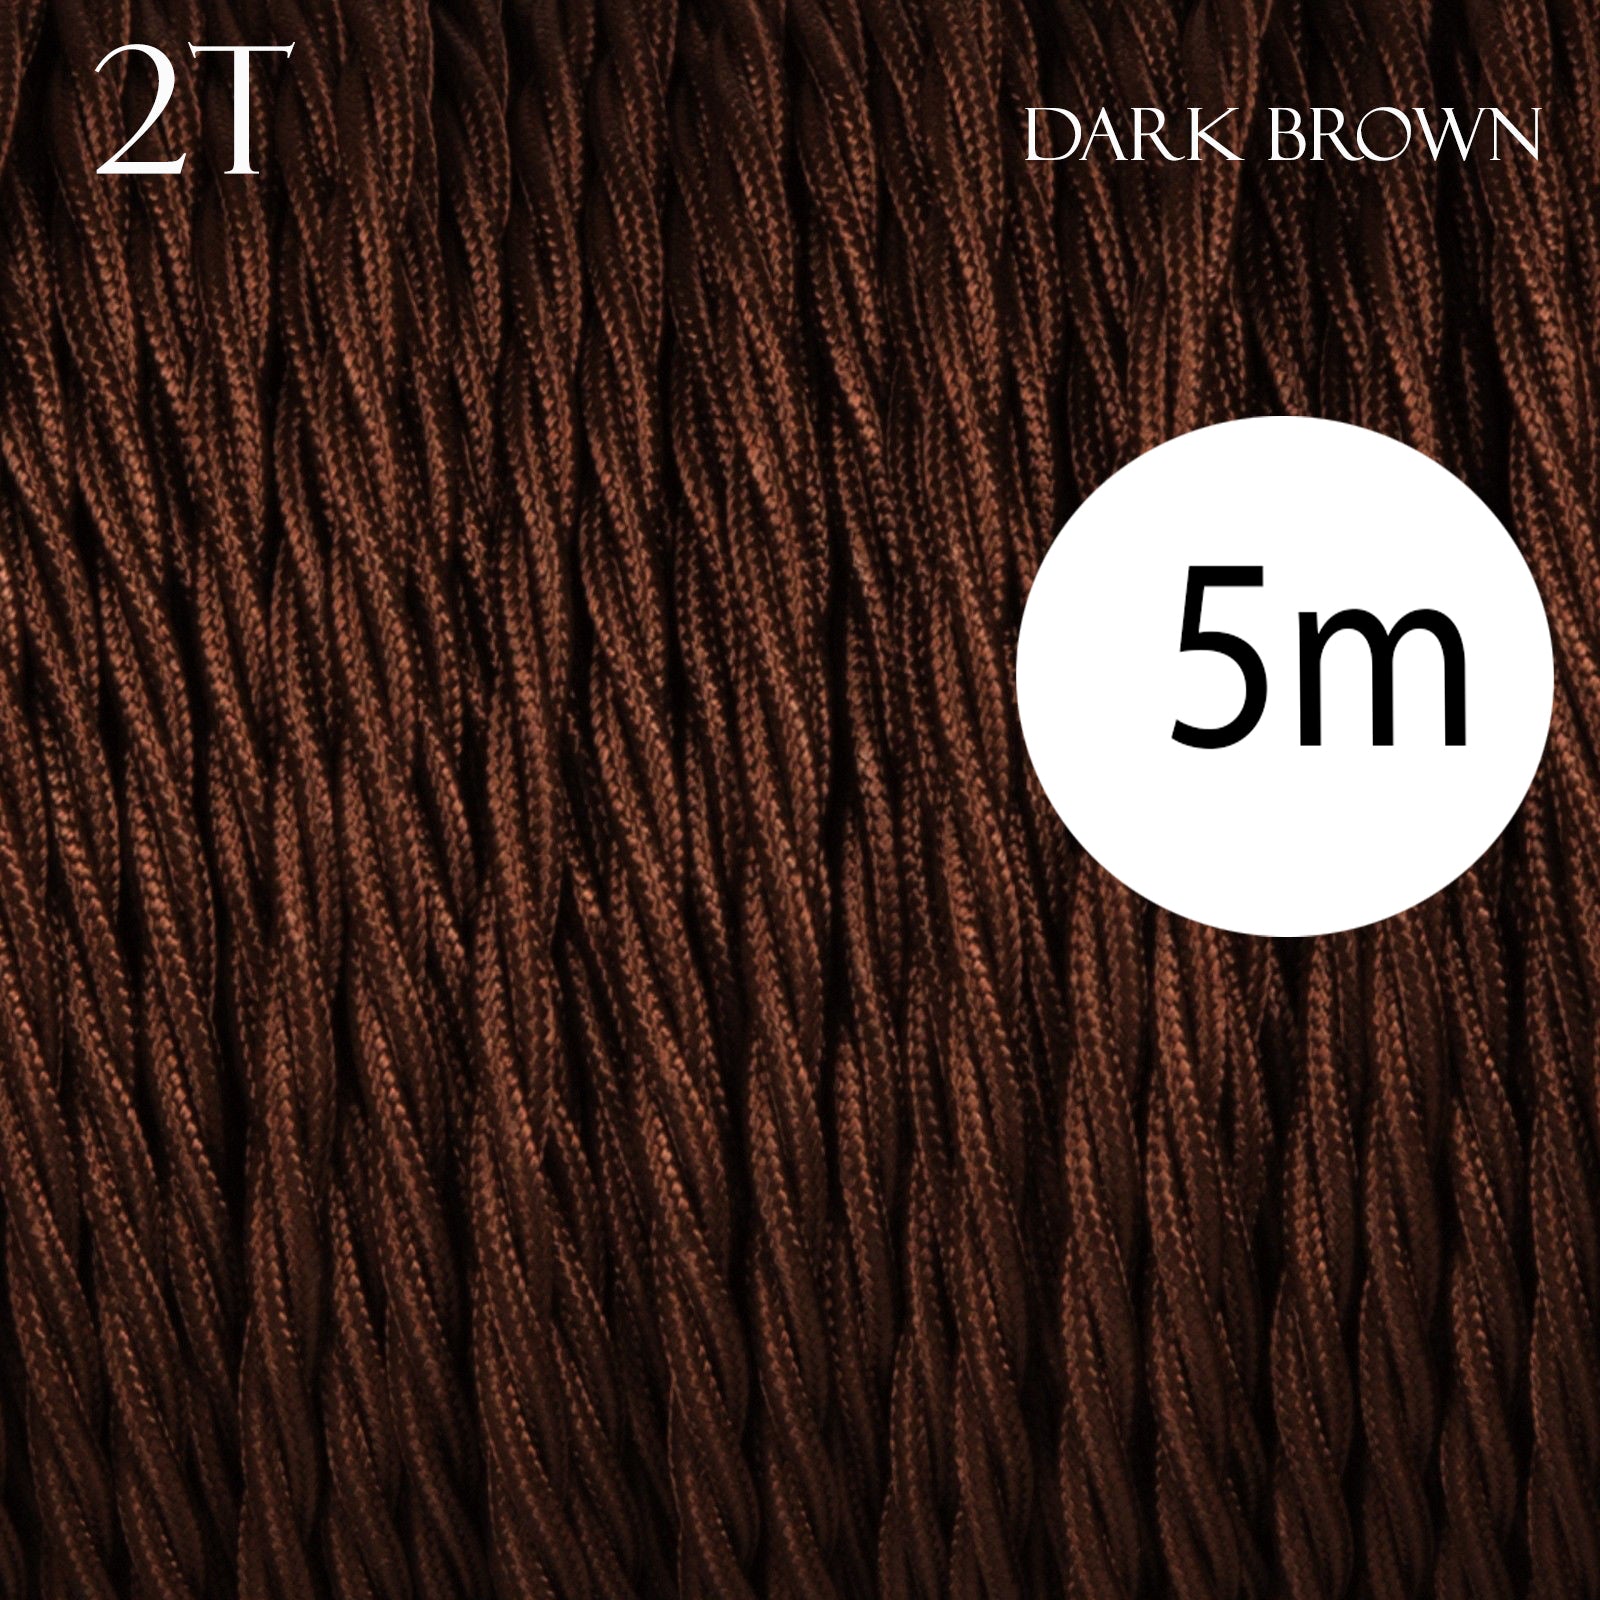 Dark Brown Fabric Twisted cable.JPG